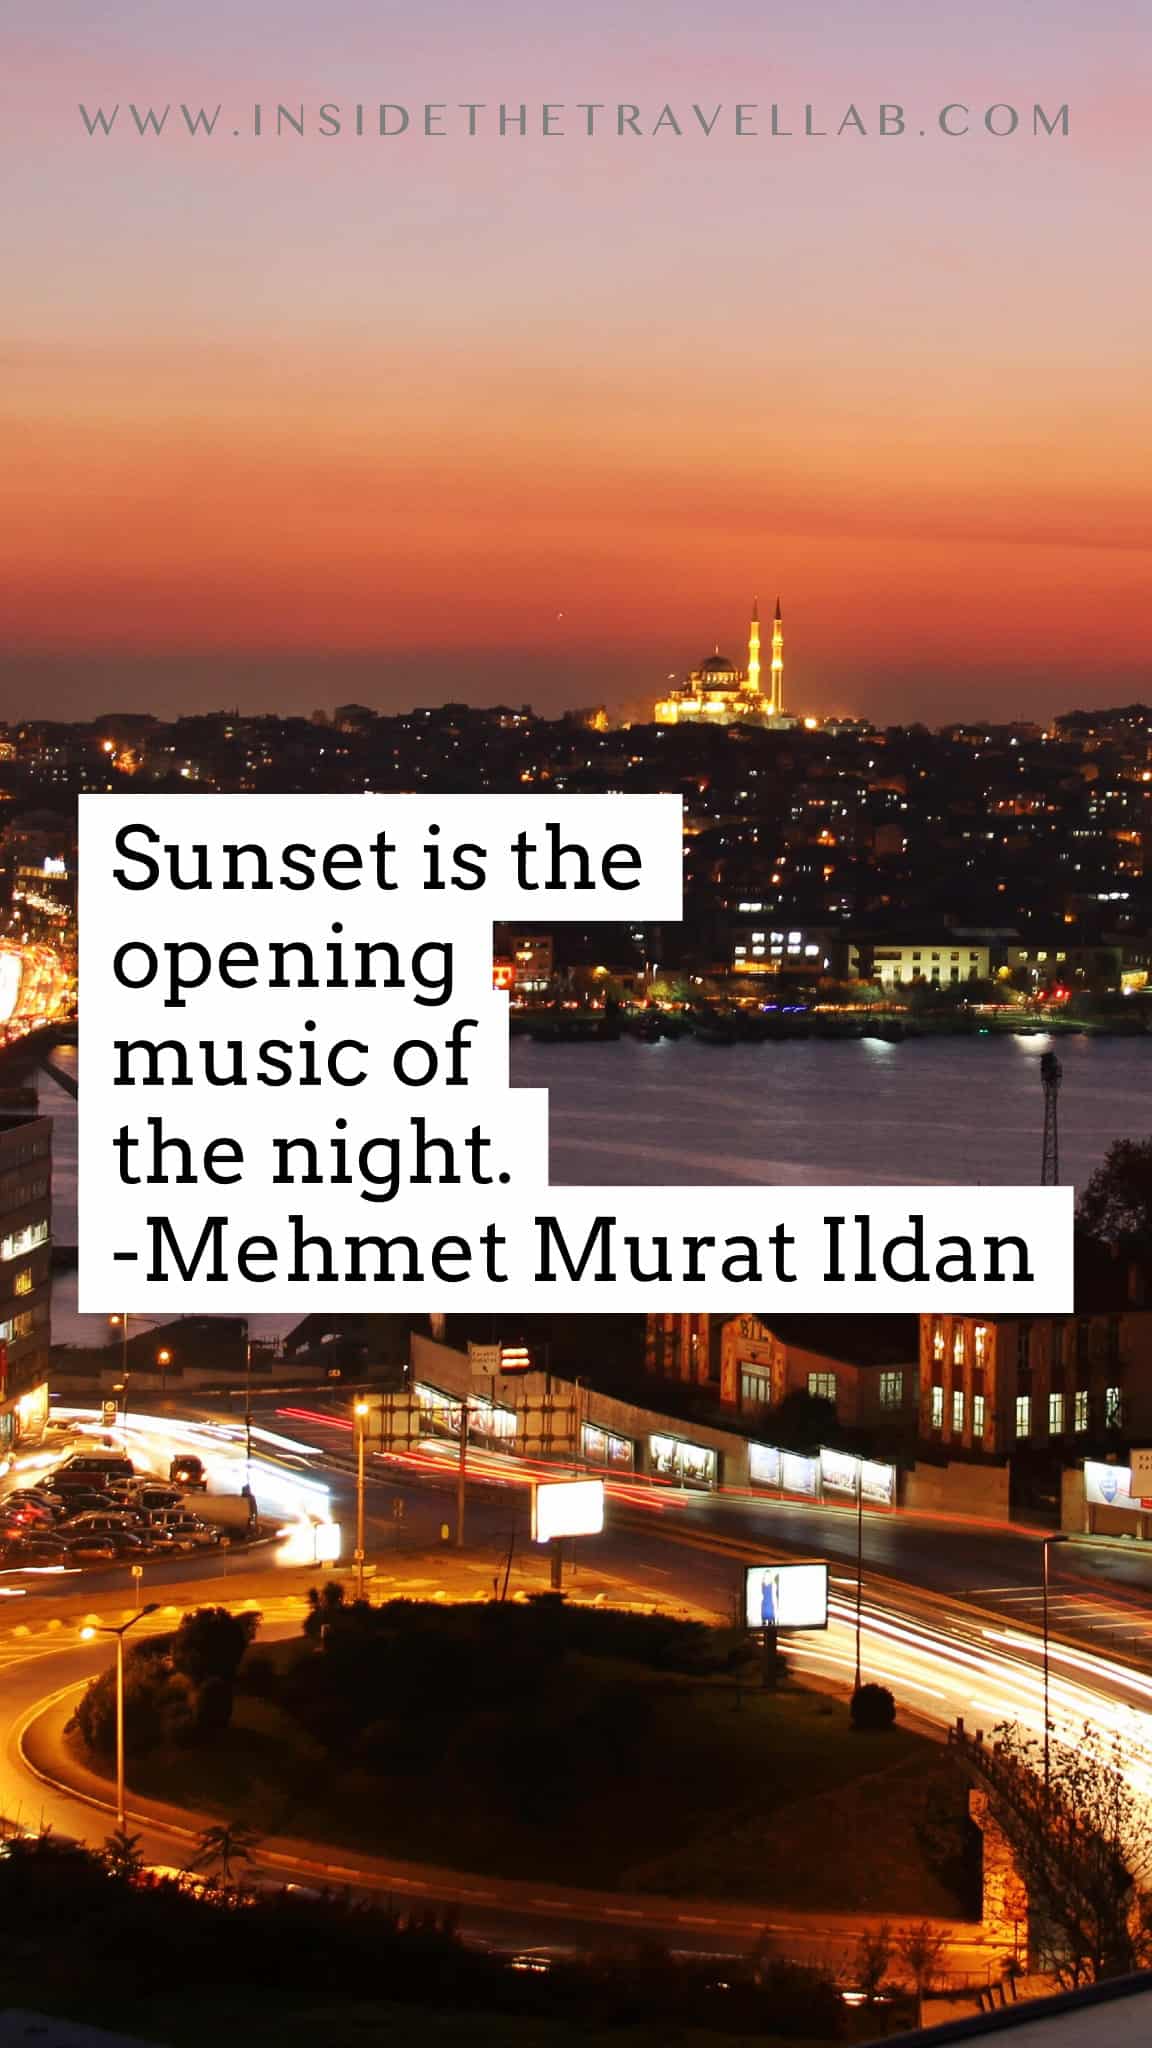 Sunset captions and sunset quotes - sunset is the opening music of the night - Mehmet Murat Ildan